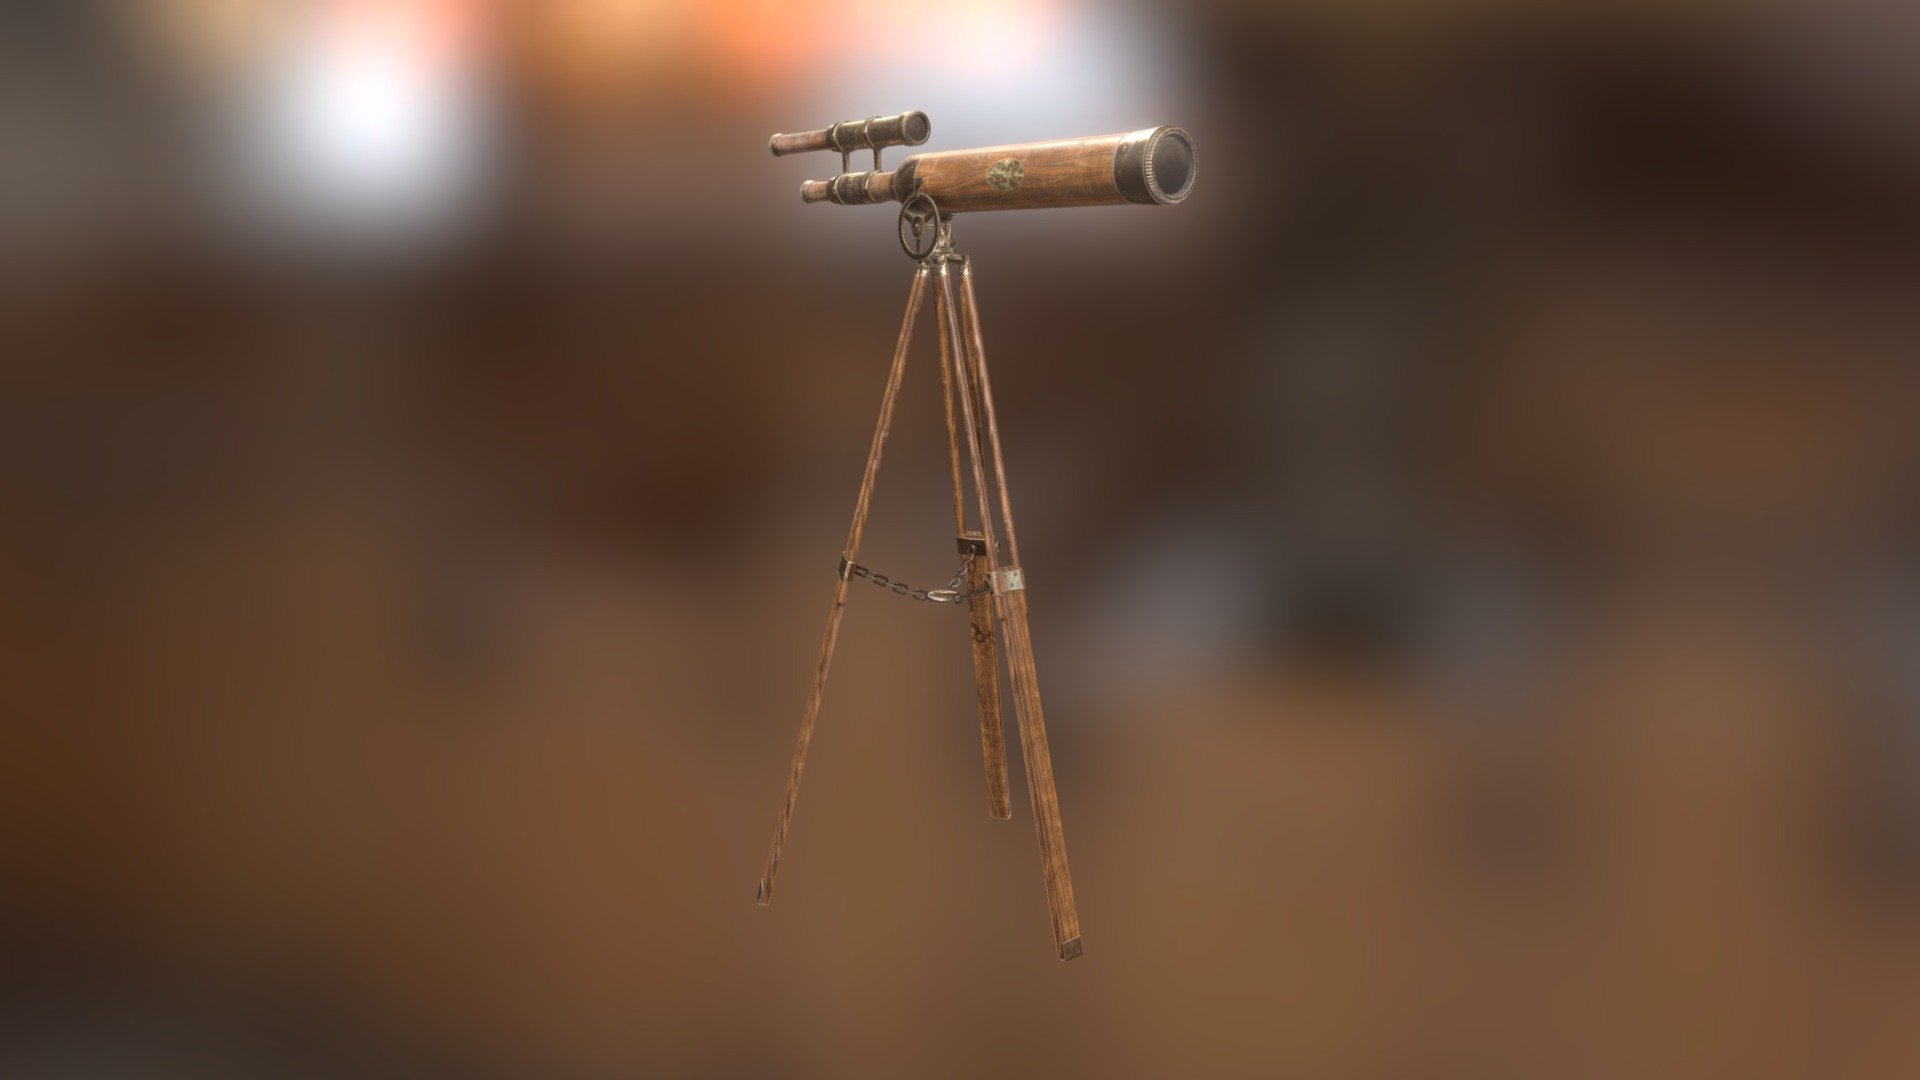 Game-ready antique telescope, with PBR textures. All textures are at 2k and 4k resolution in png format.
The model itself comes in FBX, OBJ and MLT file 3d model